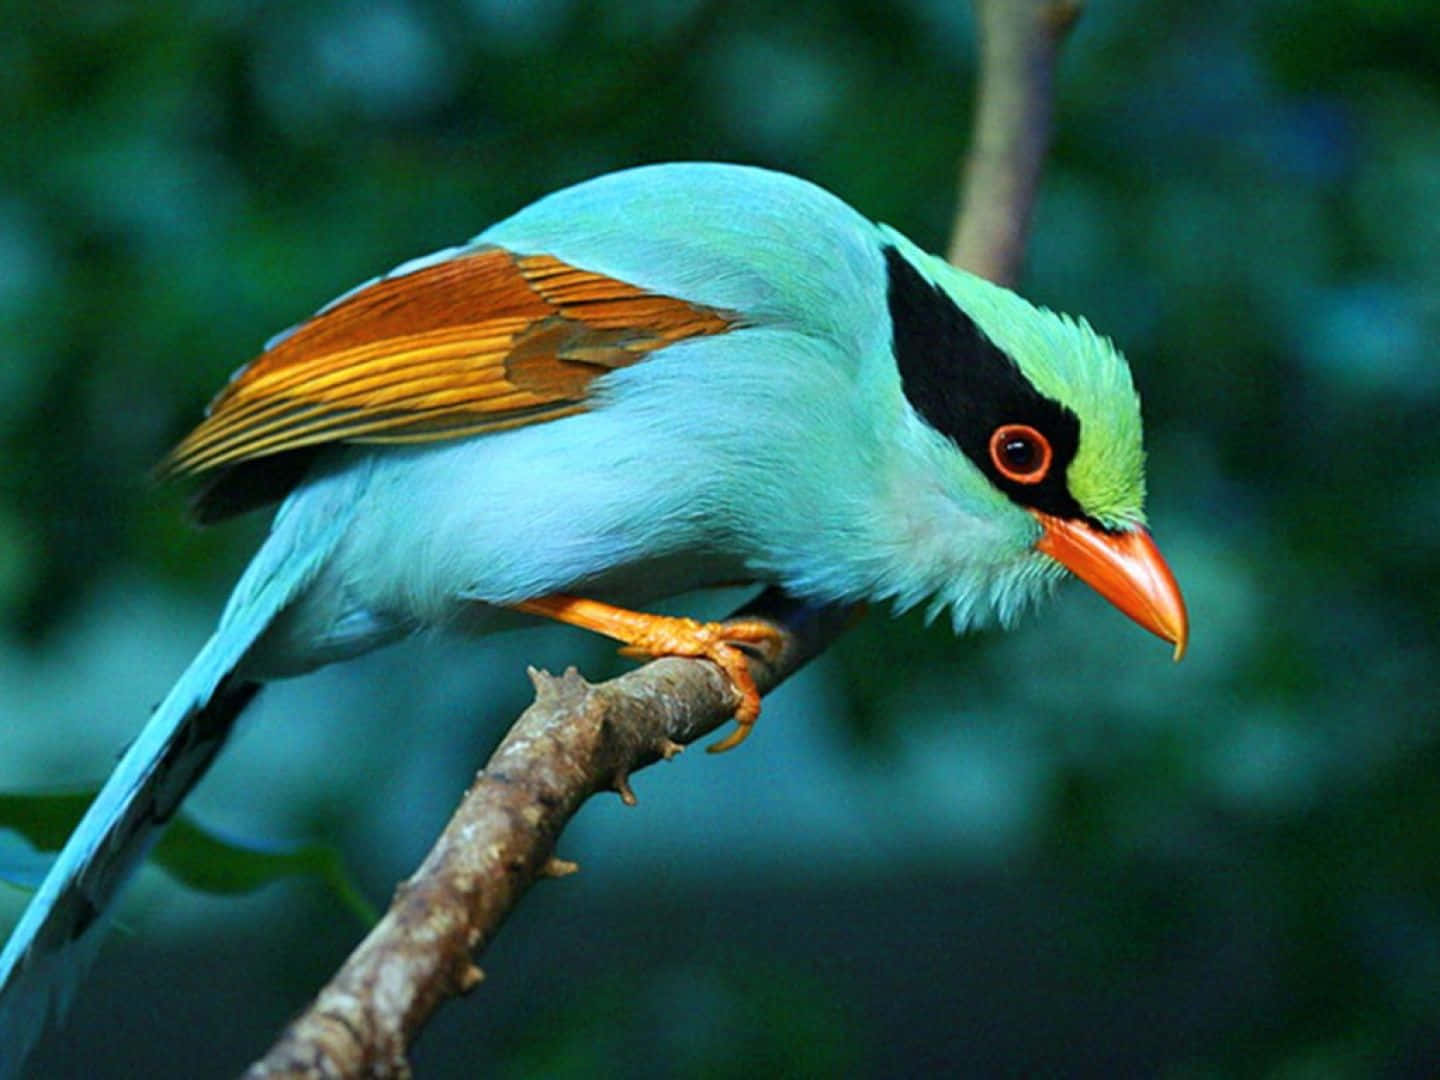 A colorful bird sits atop a branch, looking out across a bright landscape.